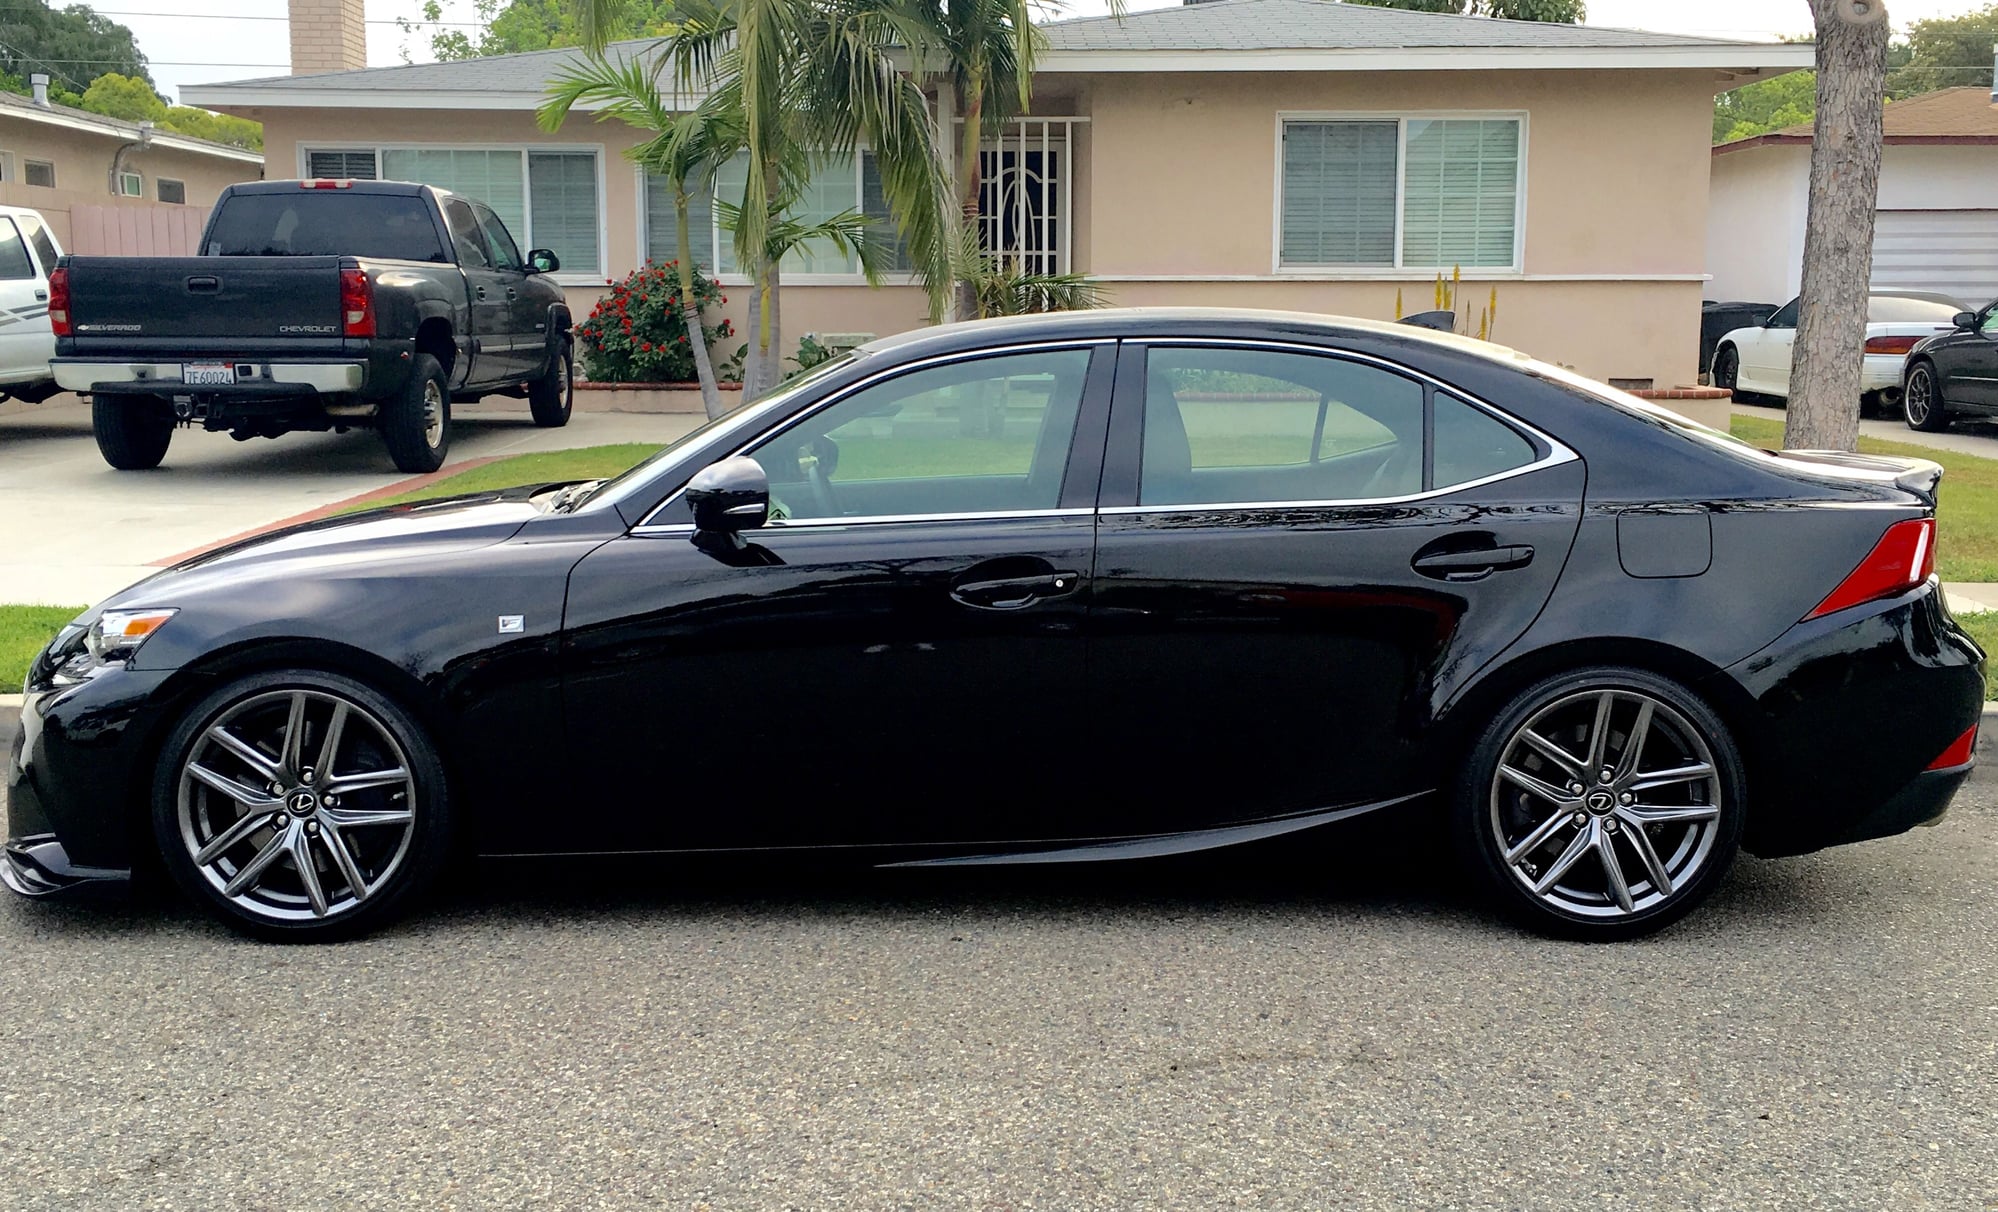 Wheels and Tires/Axles - (4) Ichiba V2 Hubcentric Wheel Spacers 5x114.3 20mm - Used - 2014 to 2016 Lexus IS200t - Santa Ana, CA 92704, United States